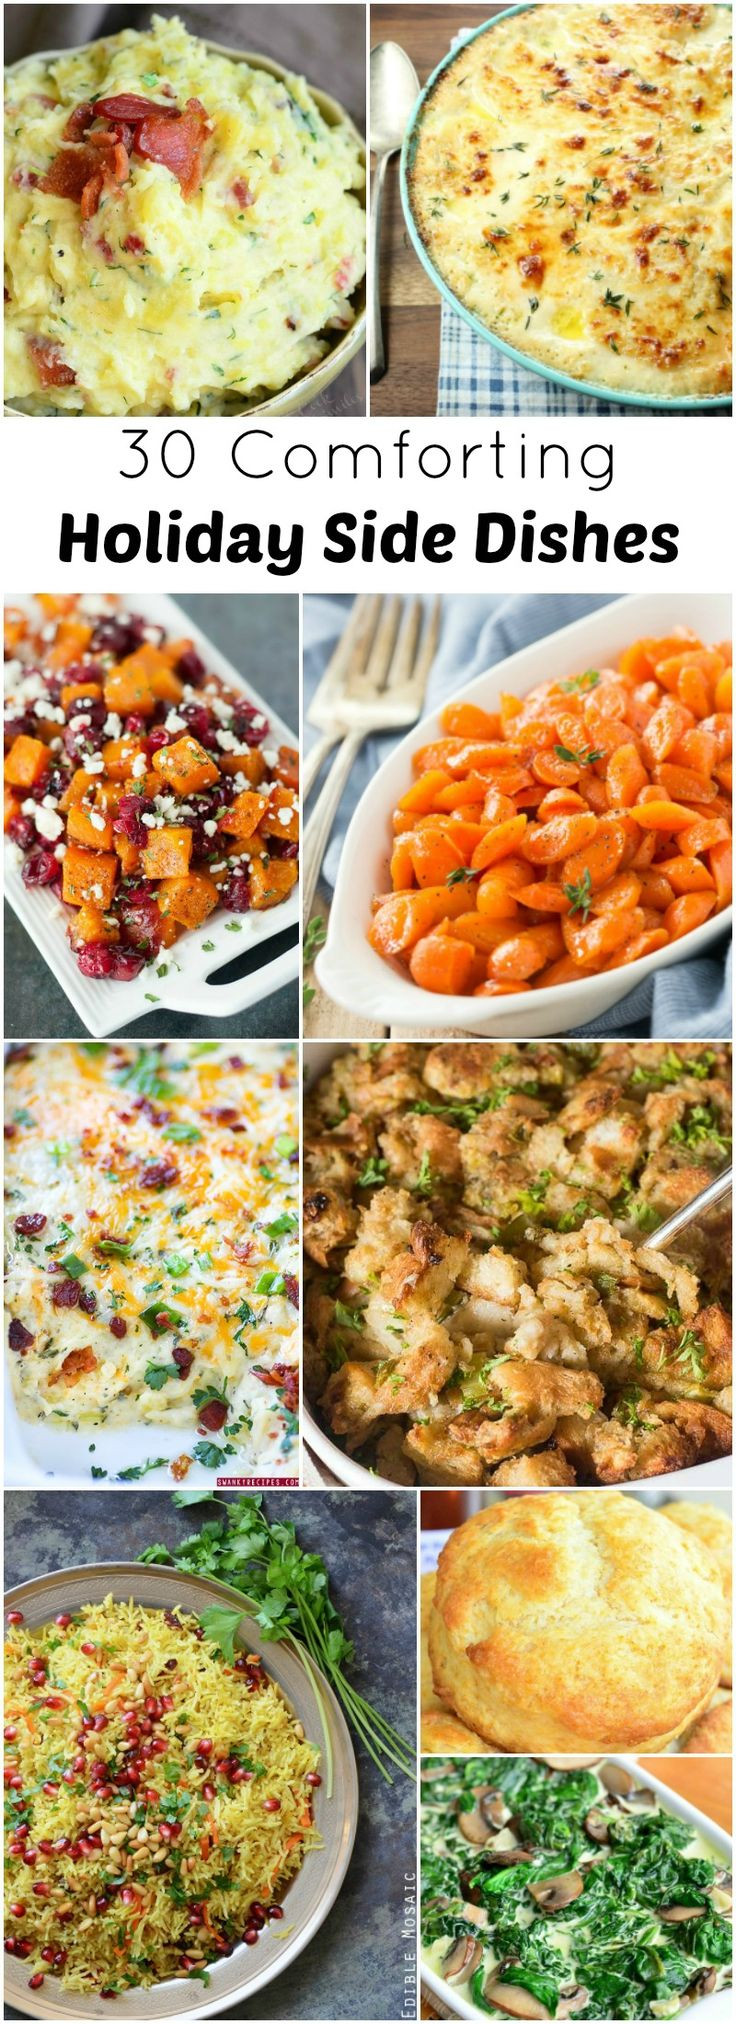 Christmas Side Dishes Pinterest
 17 Best ideas about Holiday Side Dishes on Pinterest